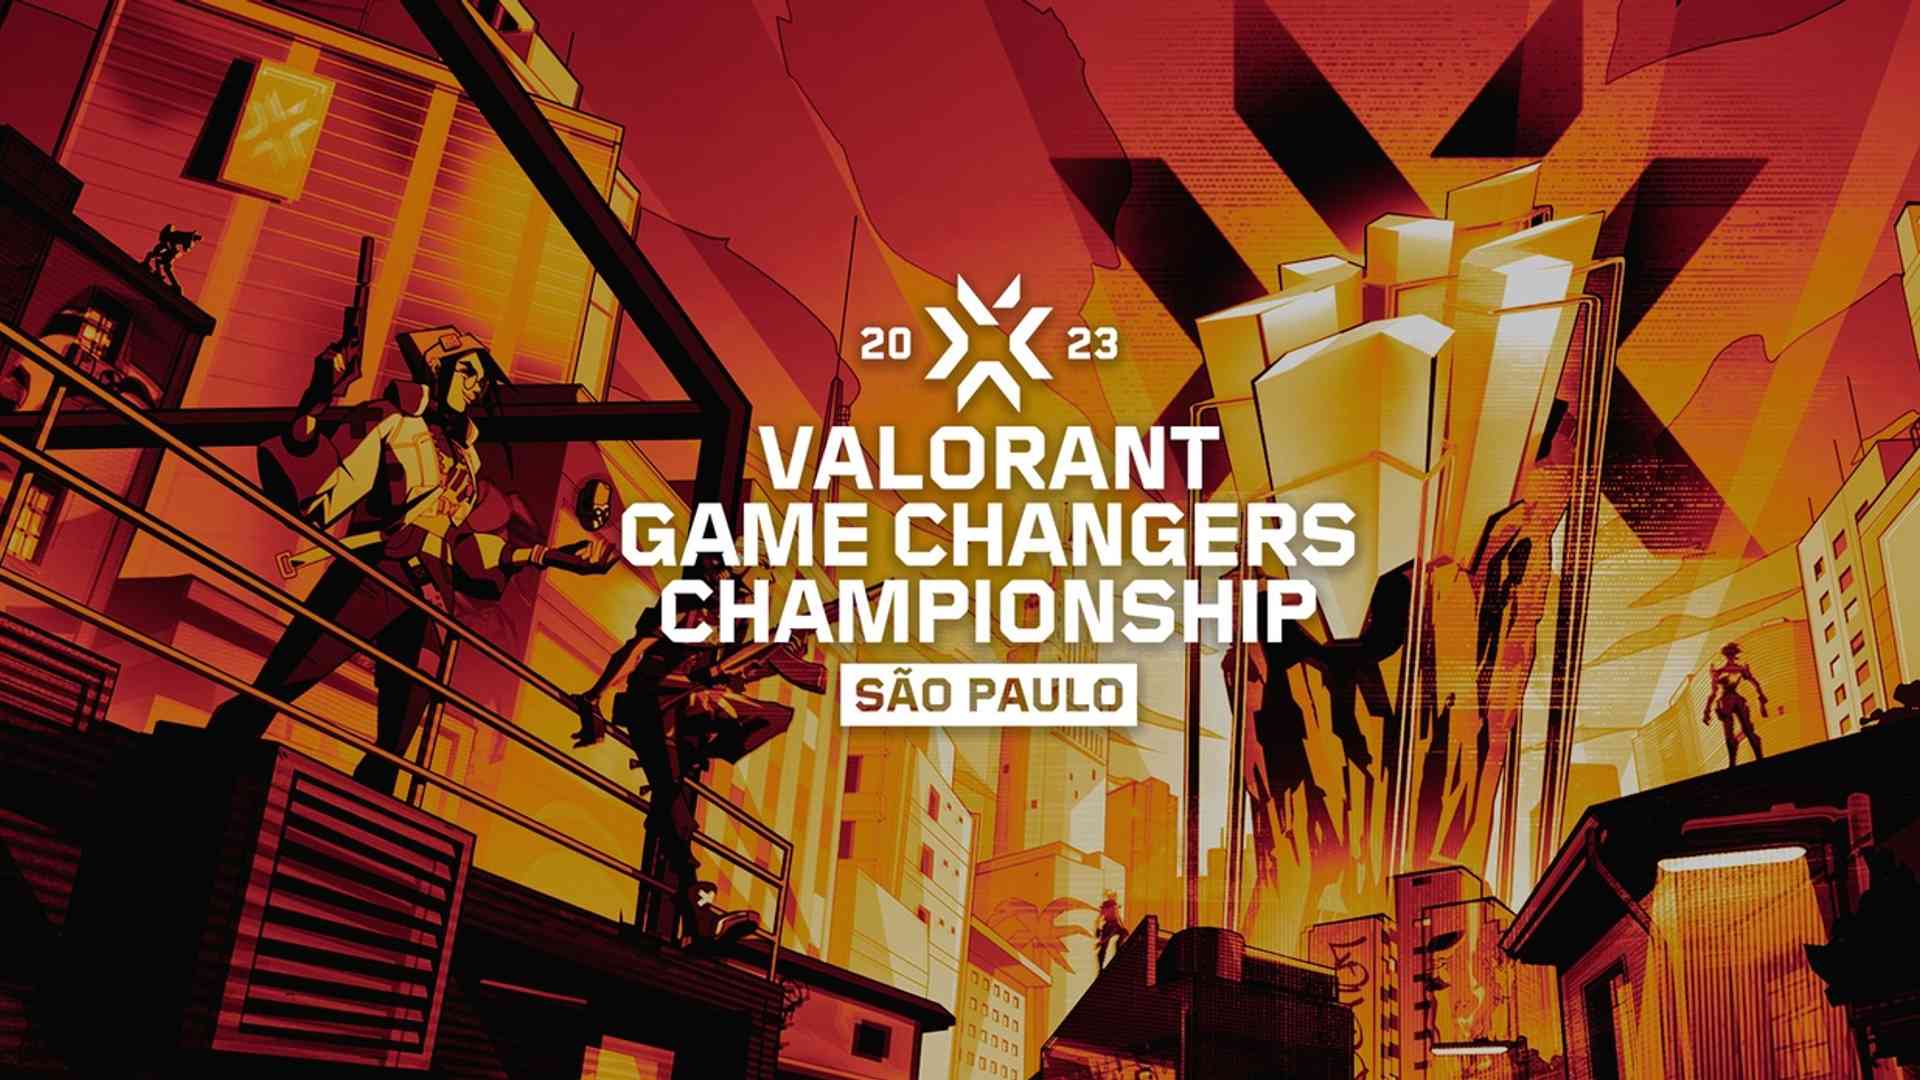 Meet the teams competing in the 2023 Game Changers Championship